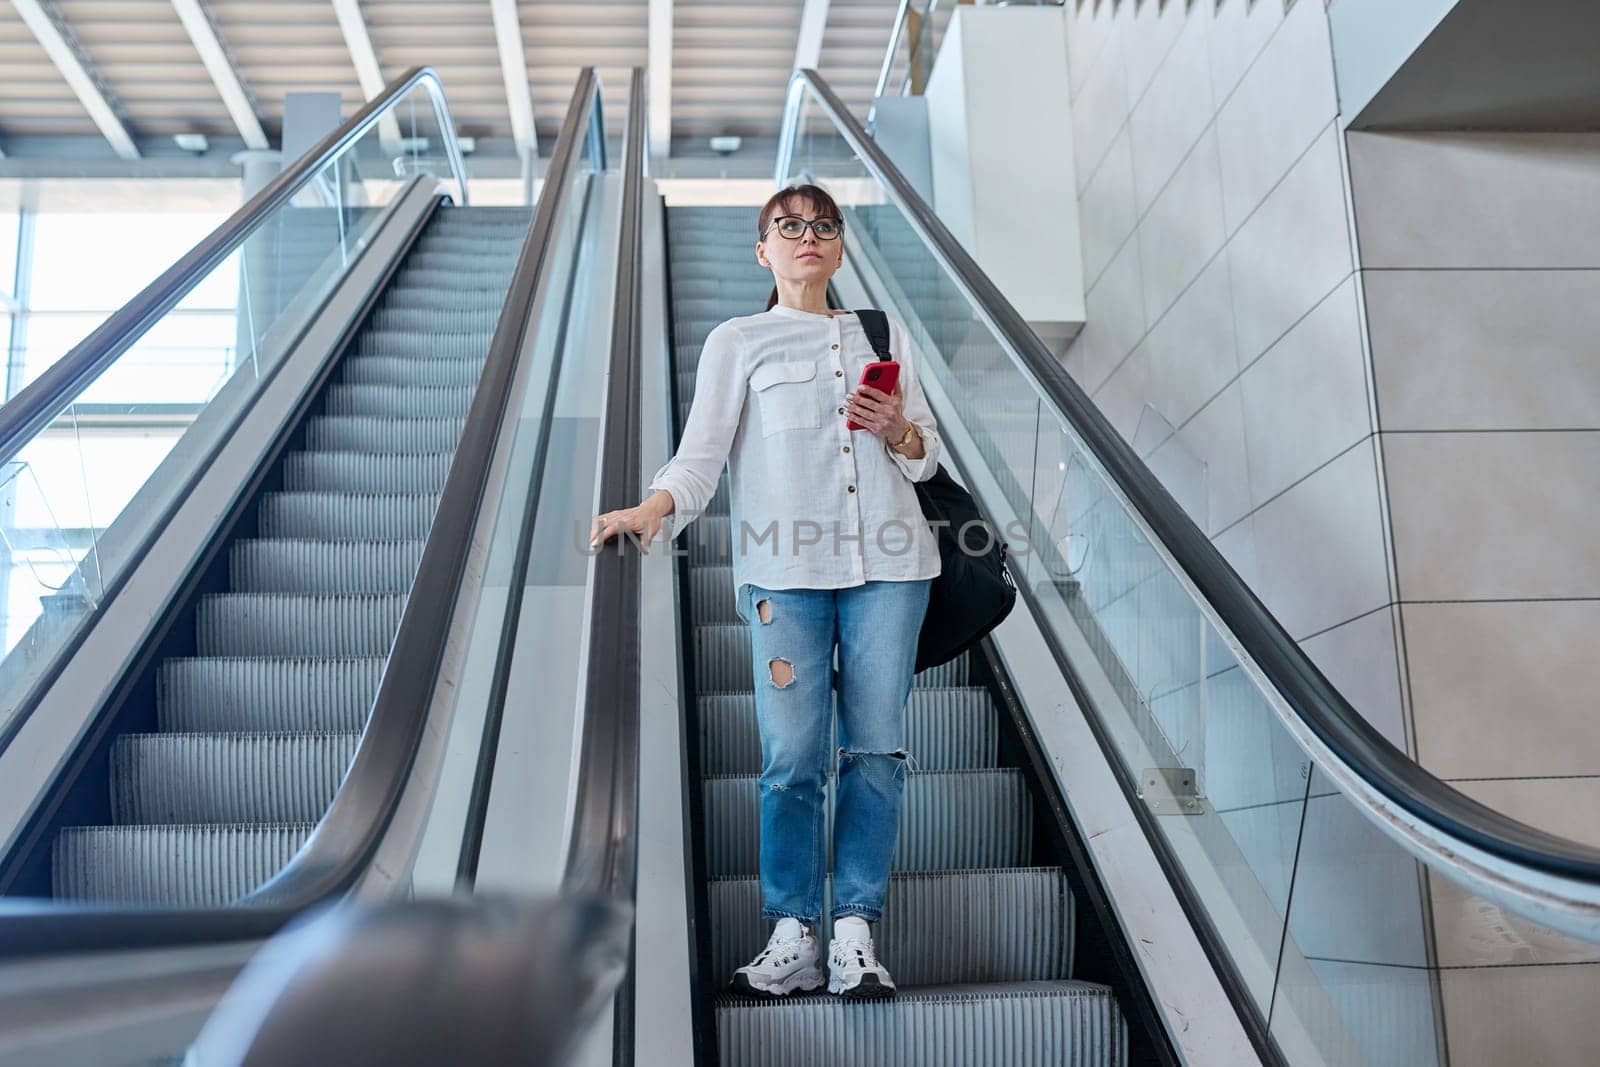 Middle-aged woman with backpack in casual style jeans on an escalator, in modern station building, airport